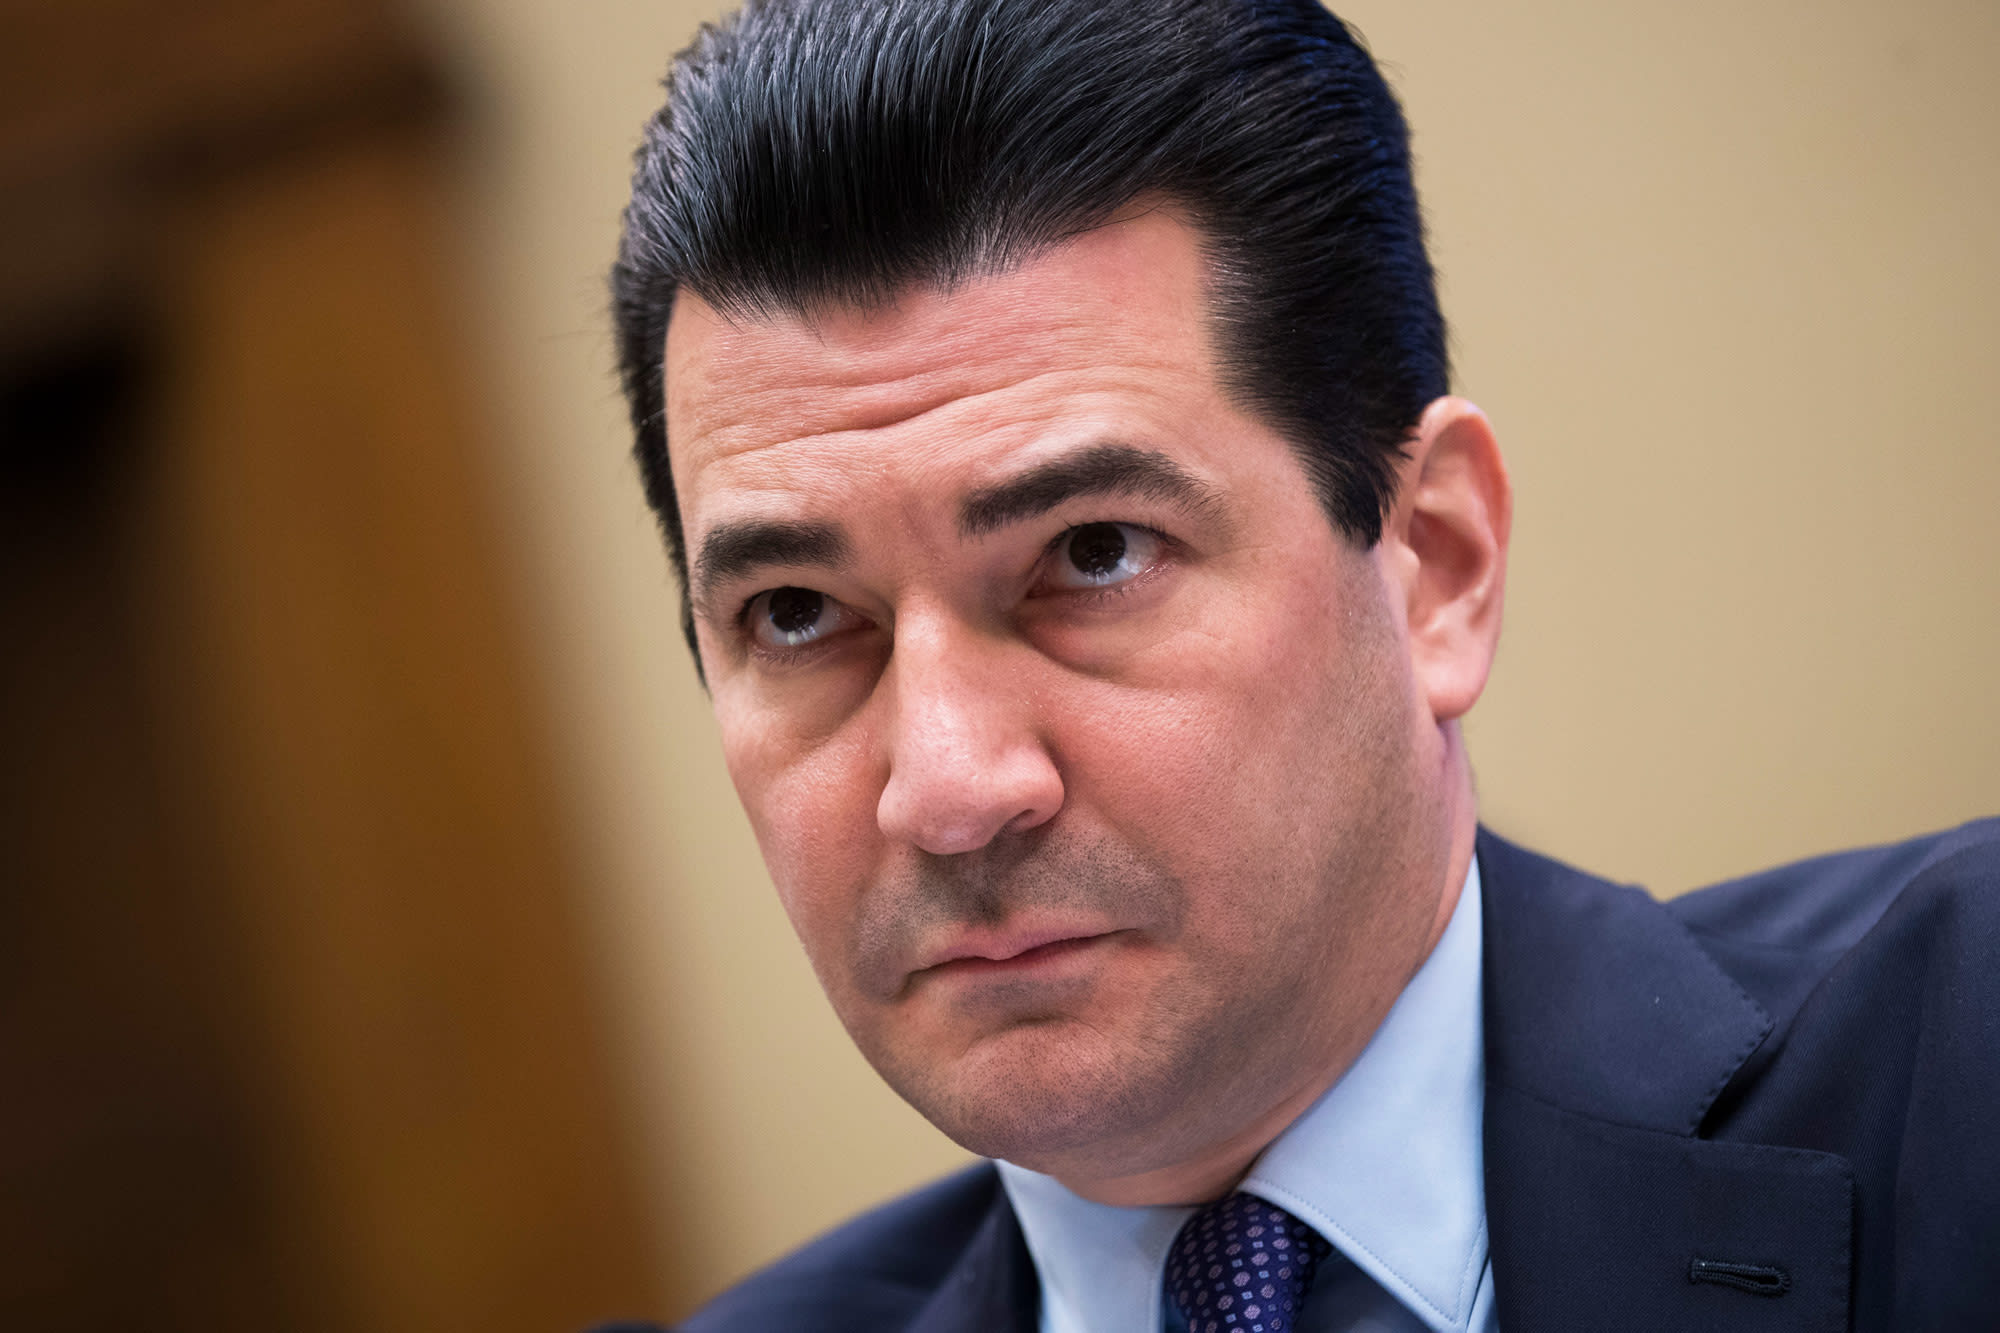 Dr. Scott Gottlieb warns of ‘staggering’ Covid dying totals in U.S.